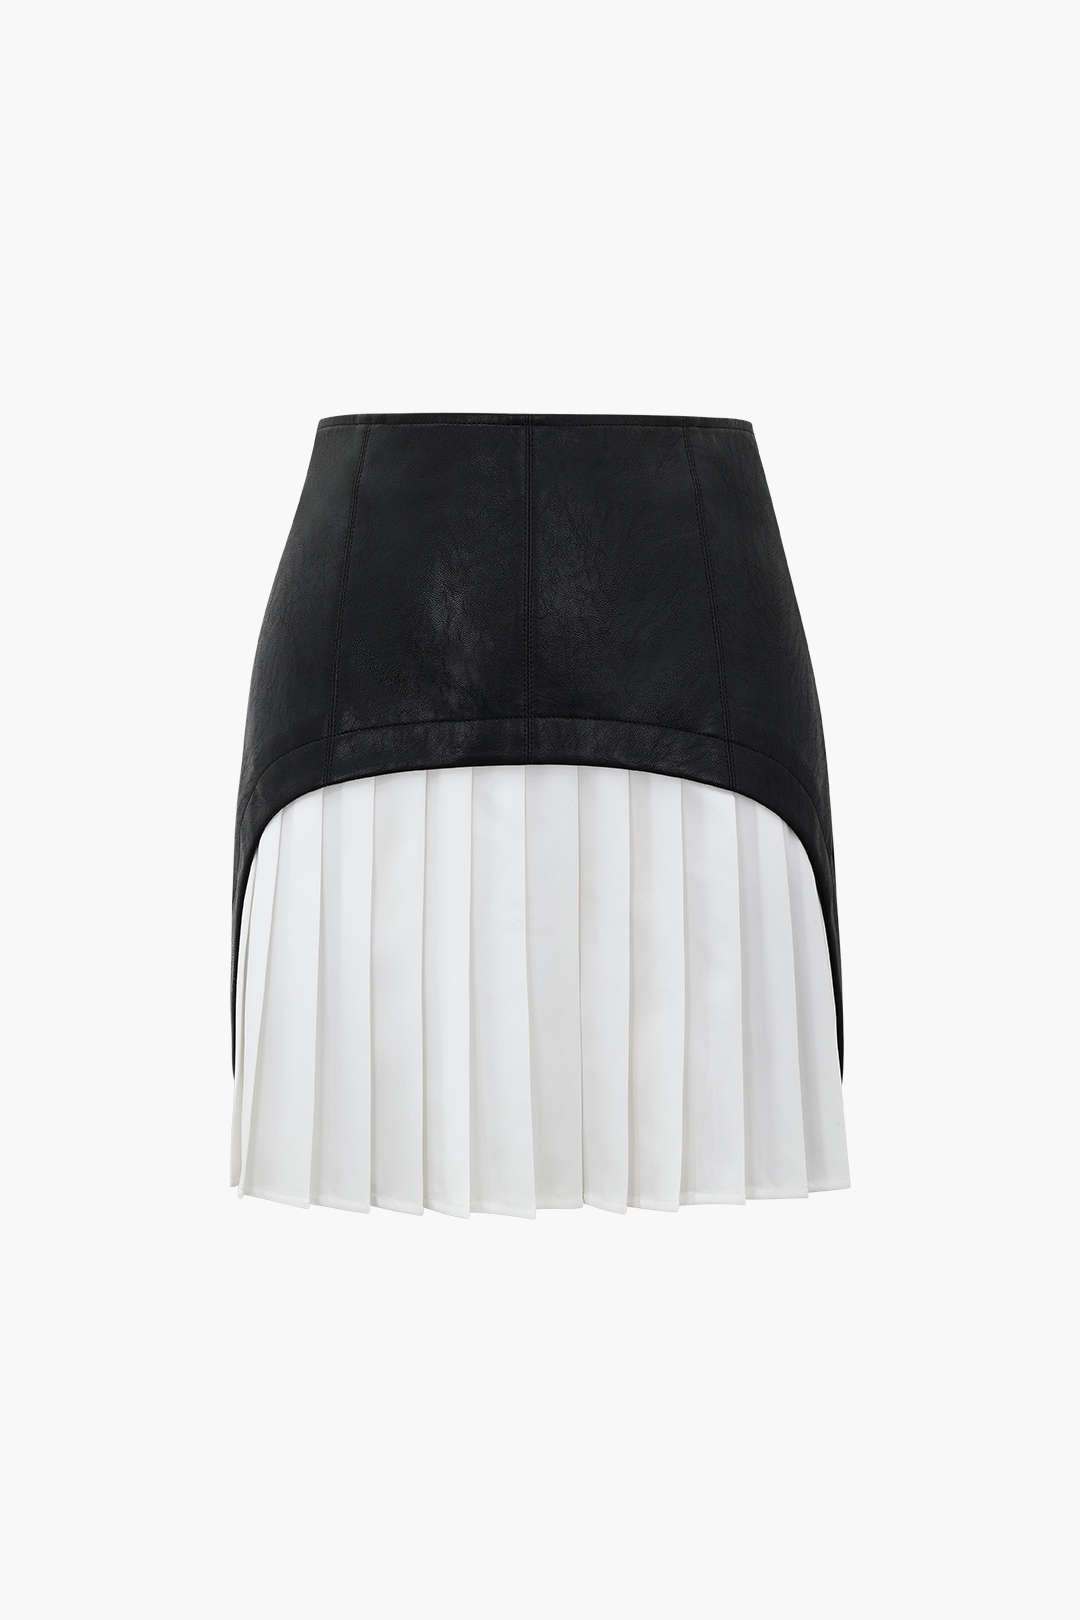 Contrast Pleated Faux Leather Mini Skirt